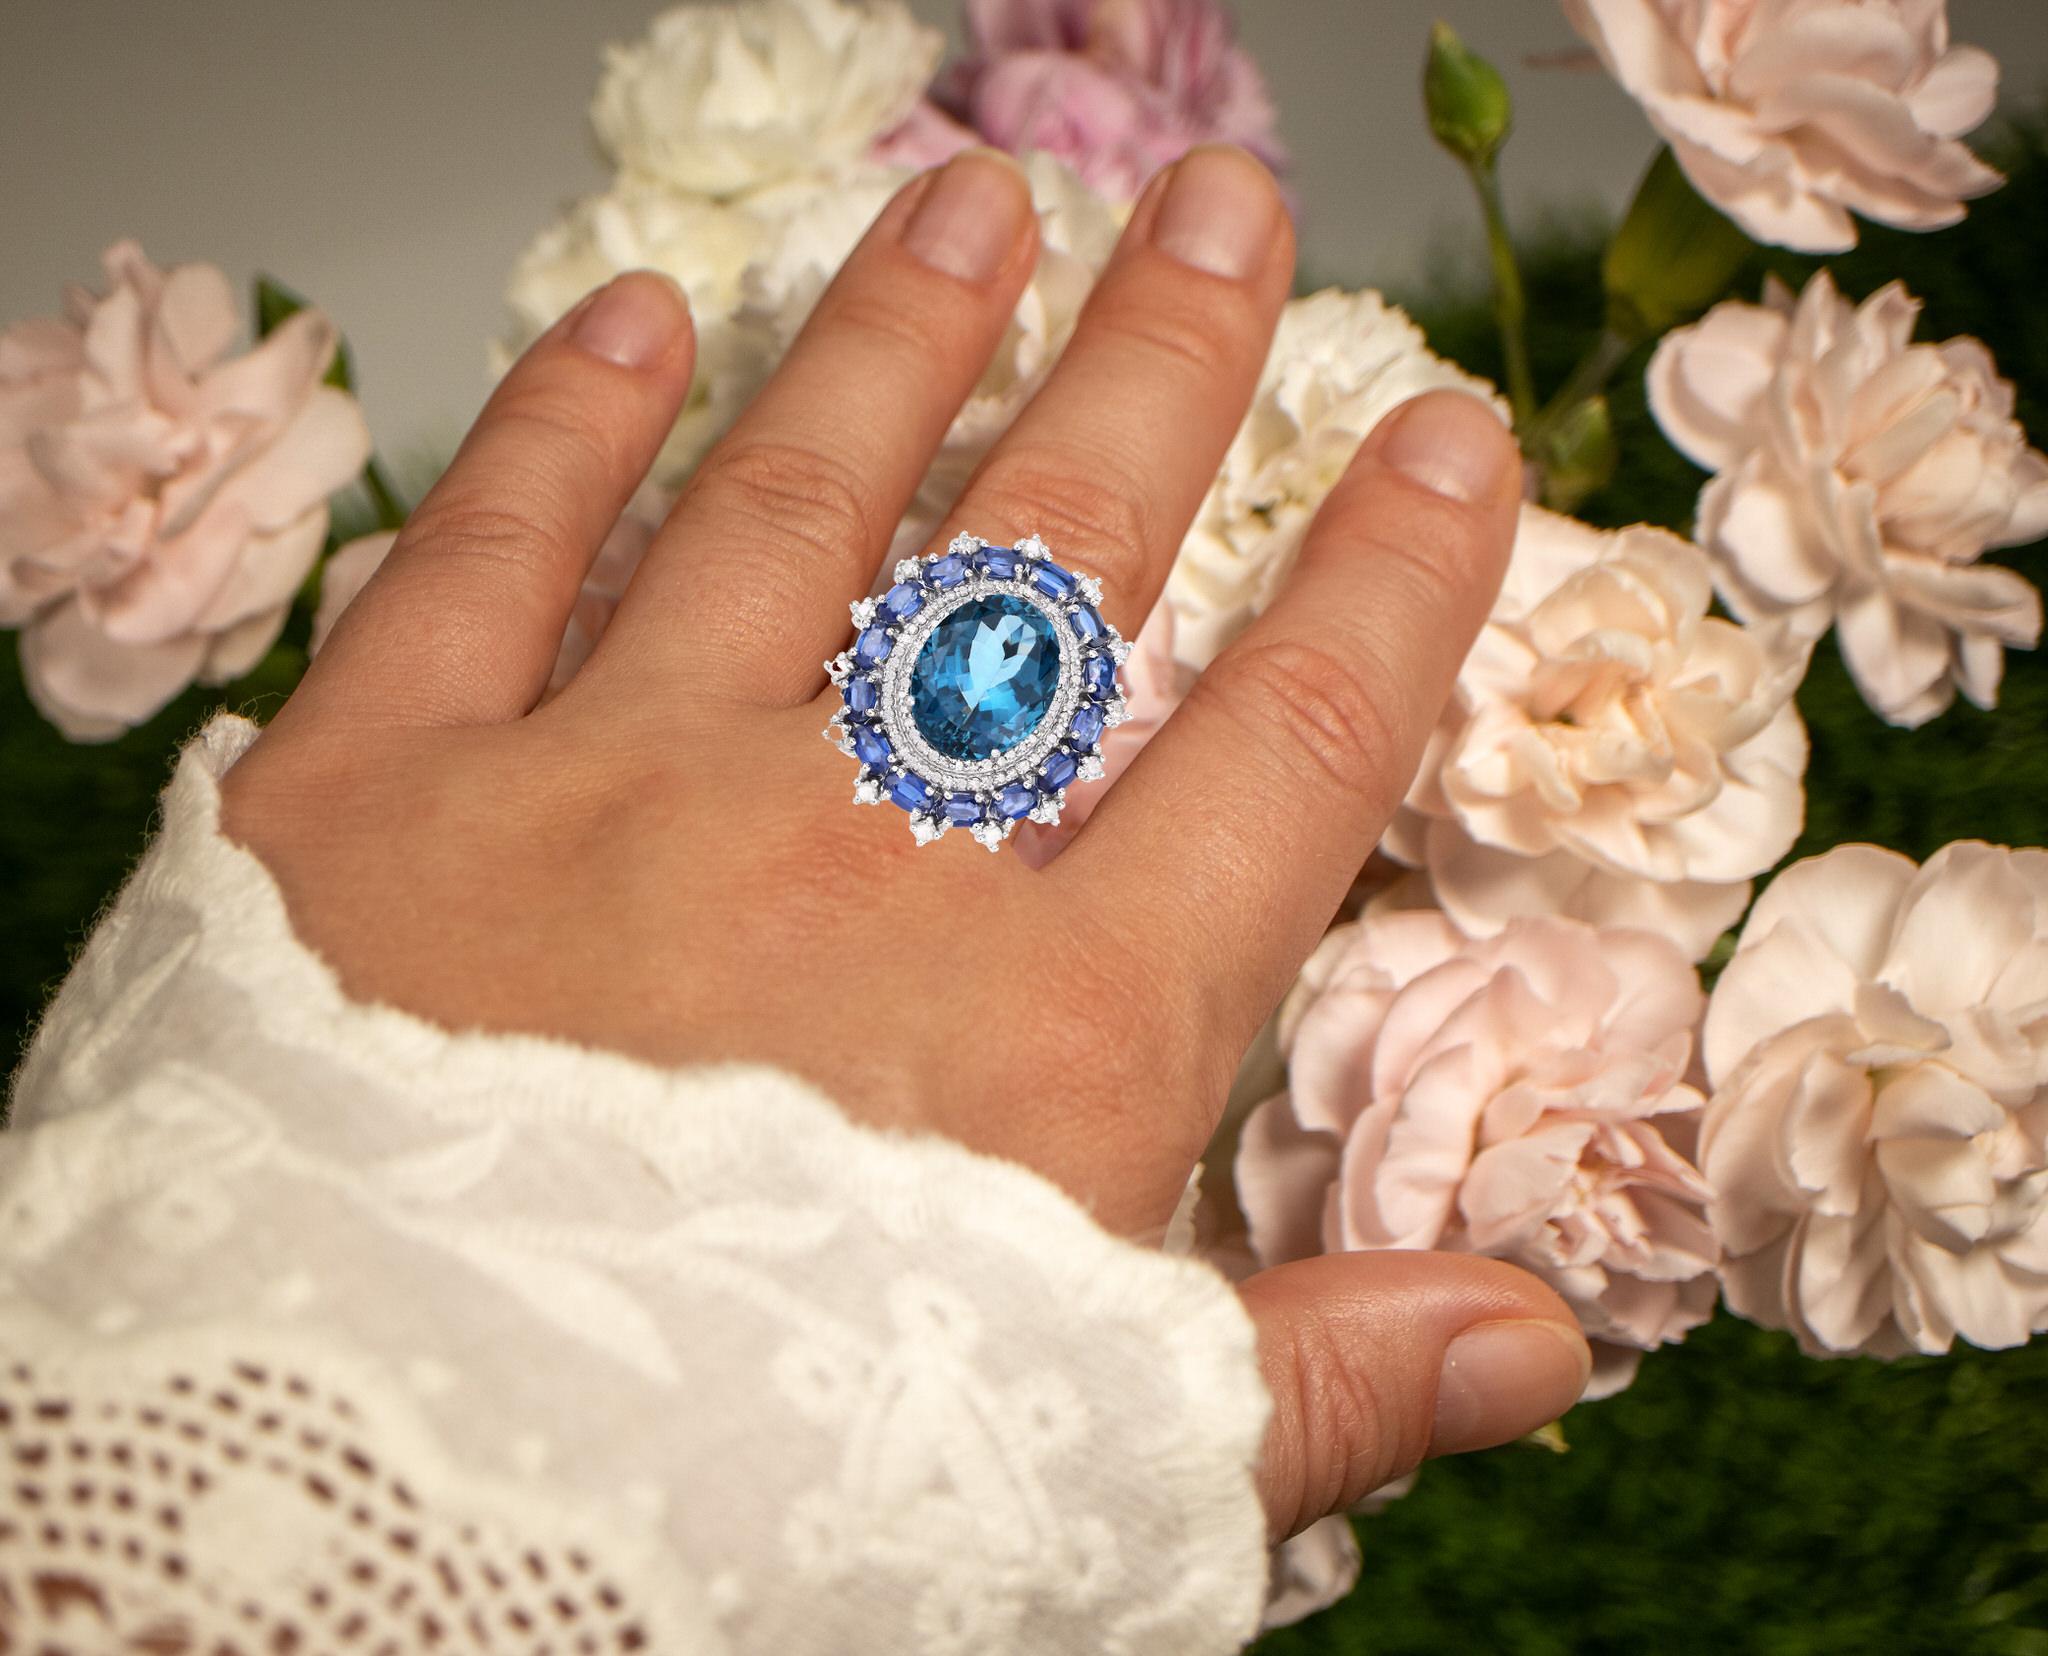 It comes with the appraisal by GIA GG/AJP
All Gemstones are Natural
London Blue Topaz = 15.50 Carat
14 Kyanites = 4.40 Carats
98 Diamonds = 1.10 Carats
Metal: Rhodium Plated Sterling Silver
Ring Size: 6.5* US
*It can be resized complimentary